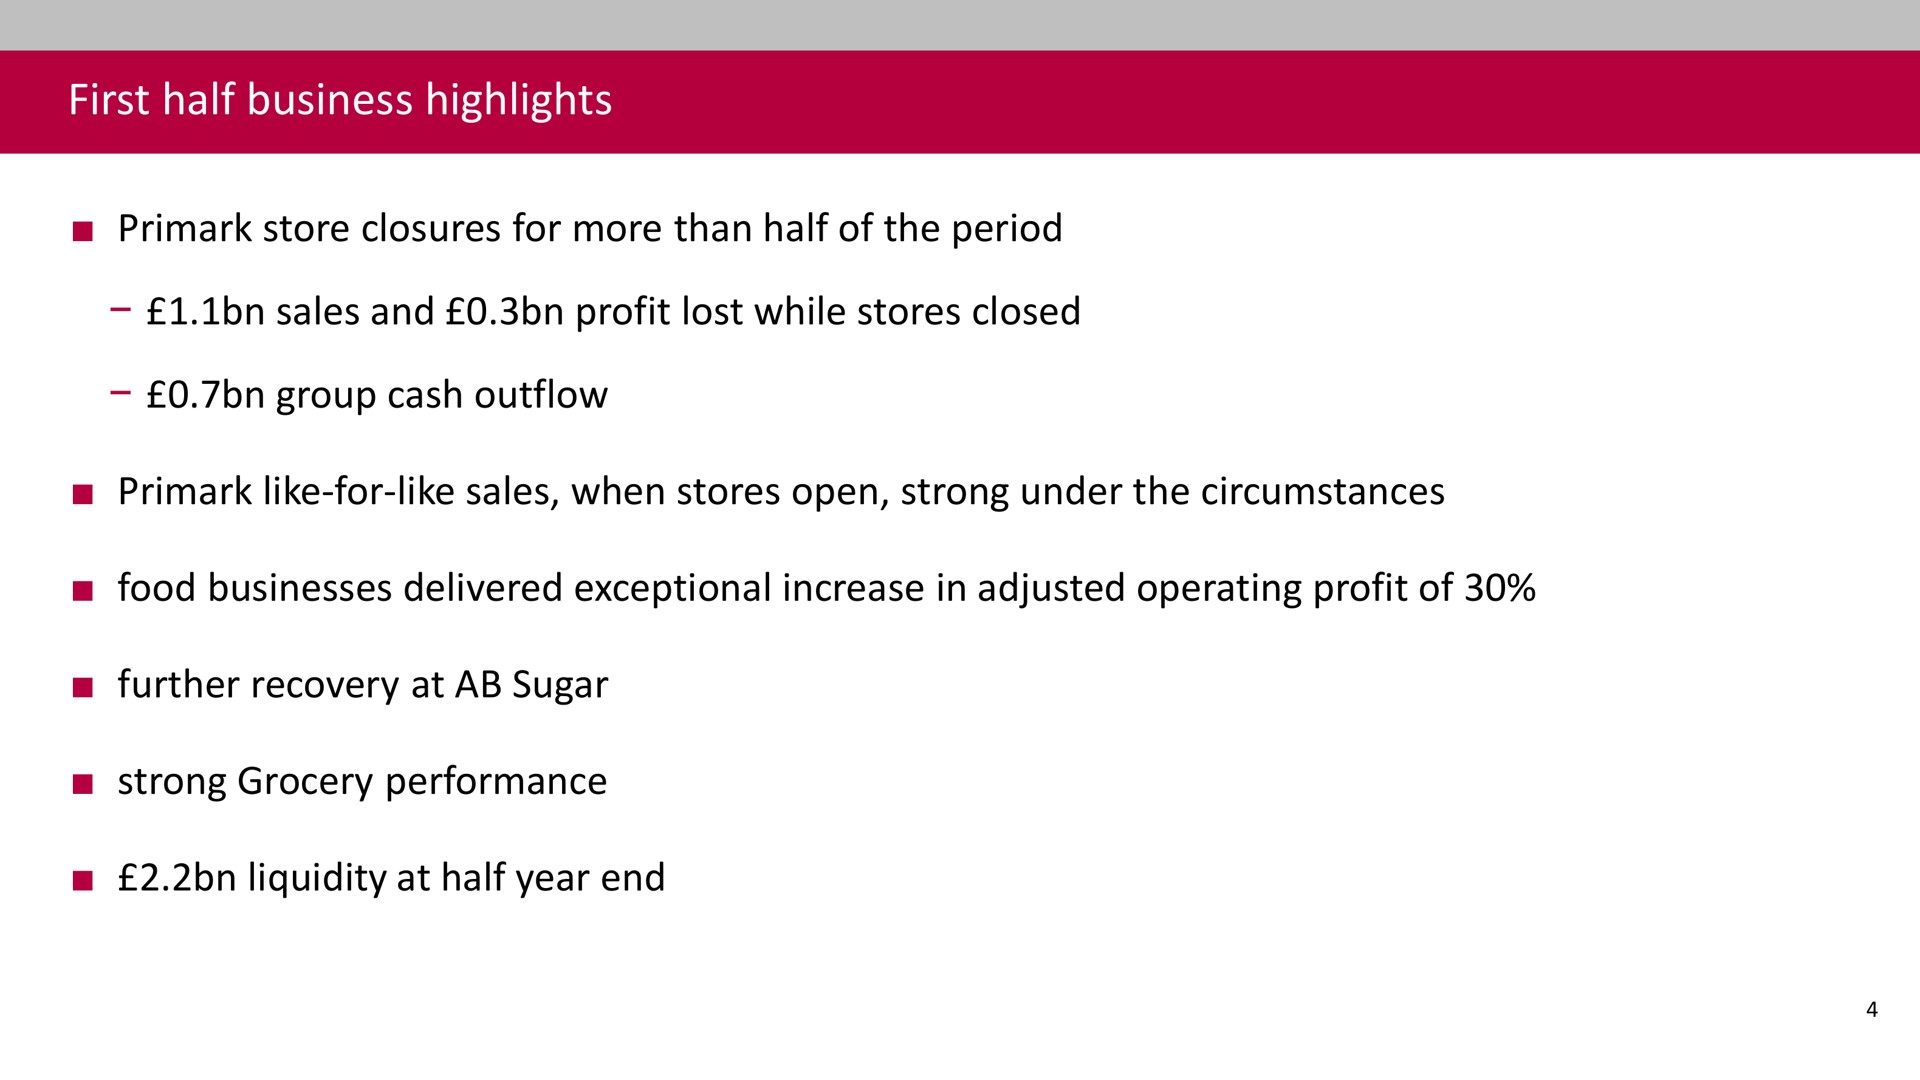 first half business highlights store closures for more than half of the period sales and profit lost while stores closed group cash outflow like for like sales when stores open strong under the circumstances food businesses delivered exceptional increase in adjusted operating profit of further recovery at sugar strong grocery performance liquidity at half year end | Associated British Foods